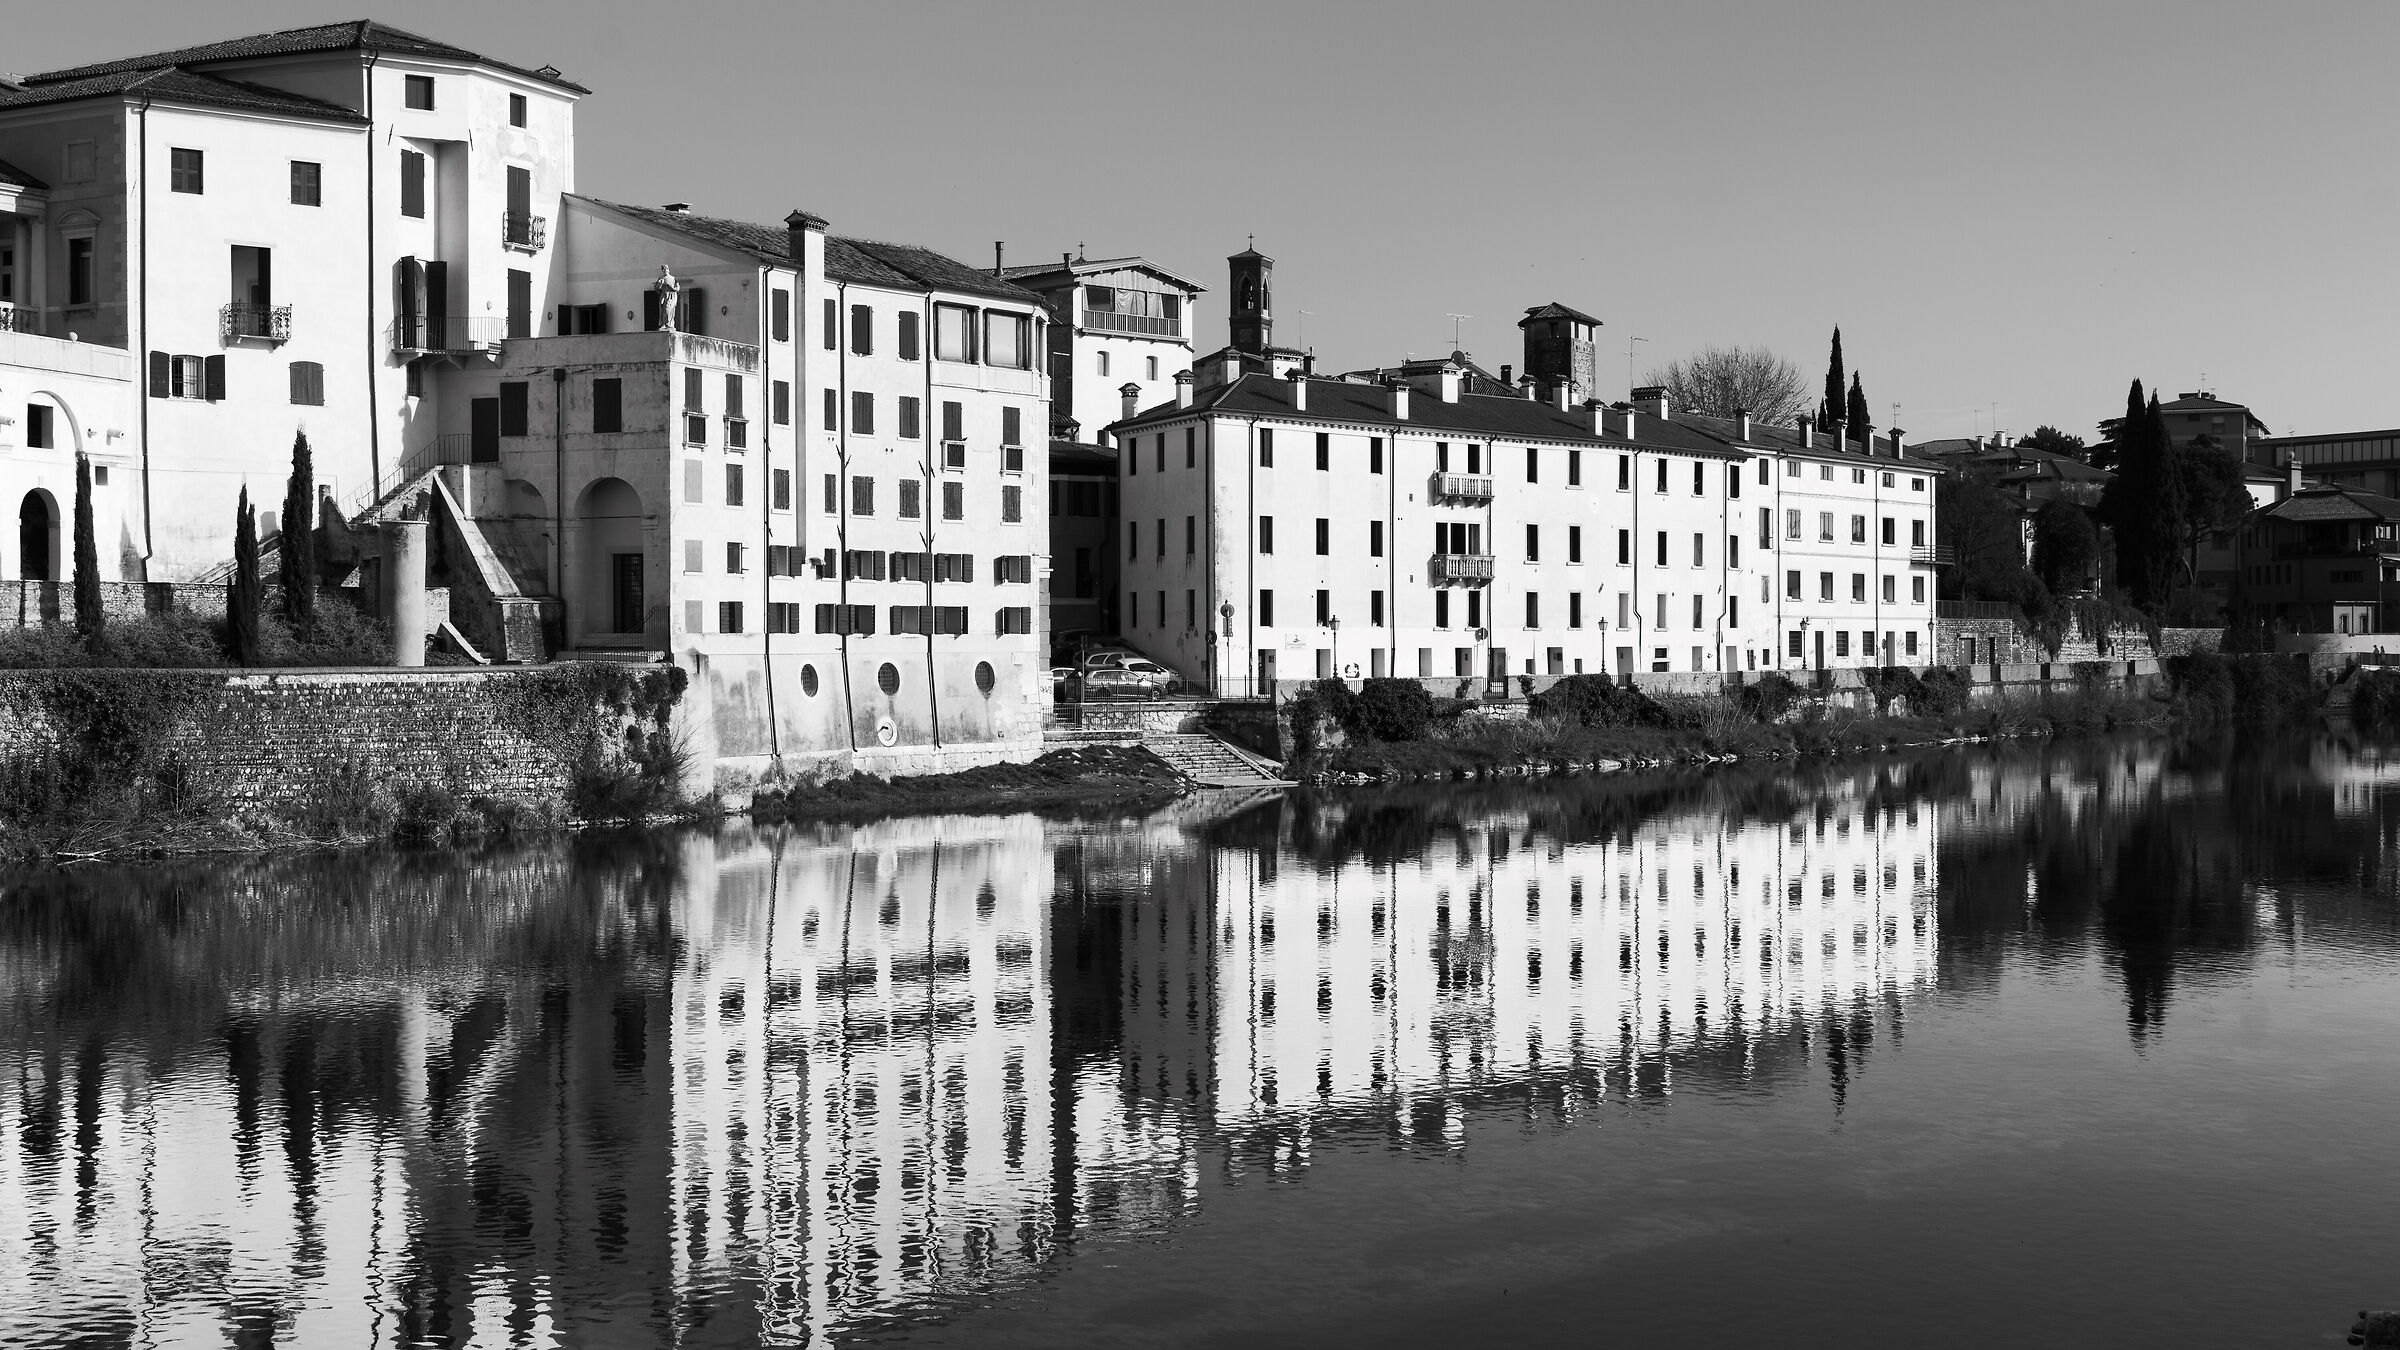 Reflections on the Brenta B&W...